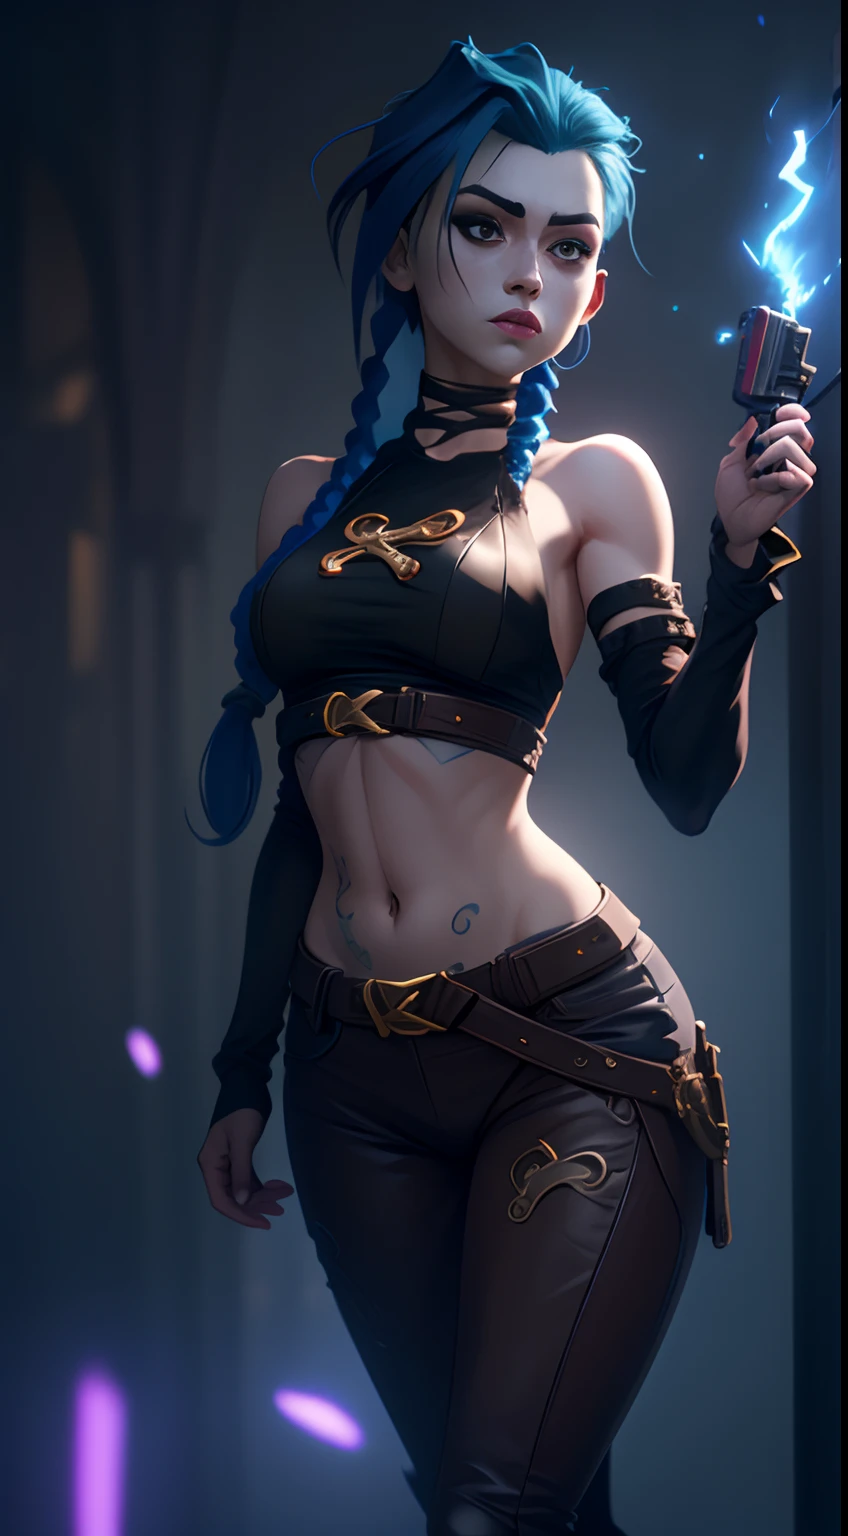 Jinx's character design, Dynamic movements, bare breast, covers the chest with his hands, Swollen ,  butt, kitty, sexypose, Beautiful figure, Arcane's Jinx, Bright blue and purple sparks all around, glowing eyes, Pink glowing eyes, hairlong, hairsh, braided into long braids, Pigtails hang below the knee, Hair color changes from bright blue to navy blue, Dressed in brown breeches, Leather boots on the feet, Top with four gold circles on the chest in the middle of the chest, Blue cloud tattoos on shoulders and waist, Long bangs, hanging on the right side, Belt with cartridges on the belt, Arcane style, extremely detailed CG unity 8k wallpaper, detailed light, Cinematic lighting, chromatic aberration, glittering, expressionless, epic composition, dark in the background, Cherecter Desing, Very detailed, Detailed body, Vibrants, Detailed Face, sharp-focus, anime art, Vibrants, Detailed Face, Hugh Details, sharp-focus, Very drooping face, A detailed eye, super fine illustration, better shadow, finely detail, Beautiful detailed glow, Beautiful detailed, Extremely detailed, expressionless, epic composition,